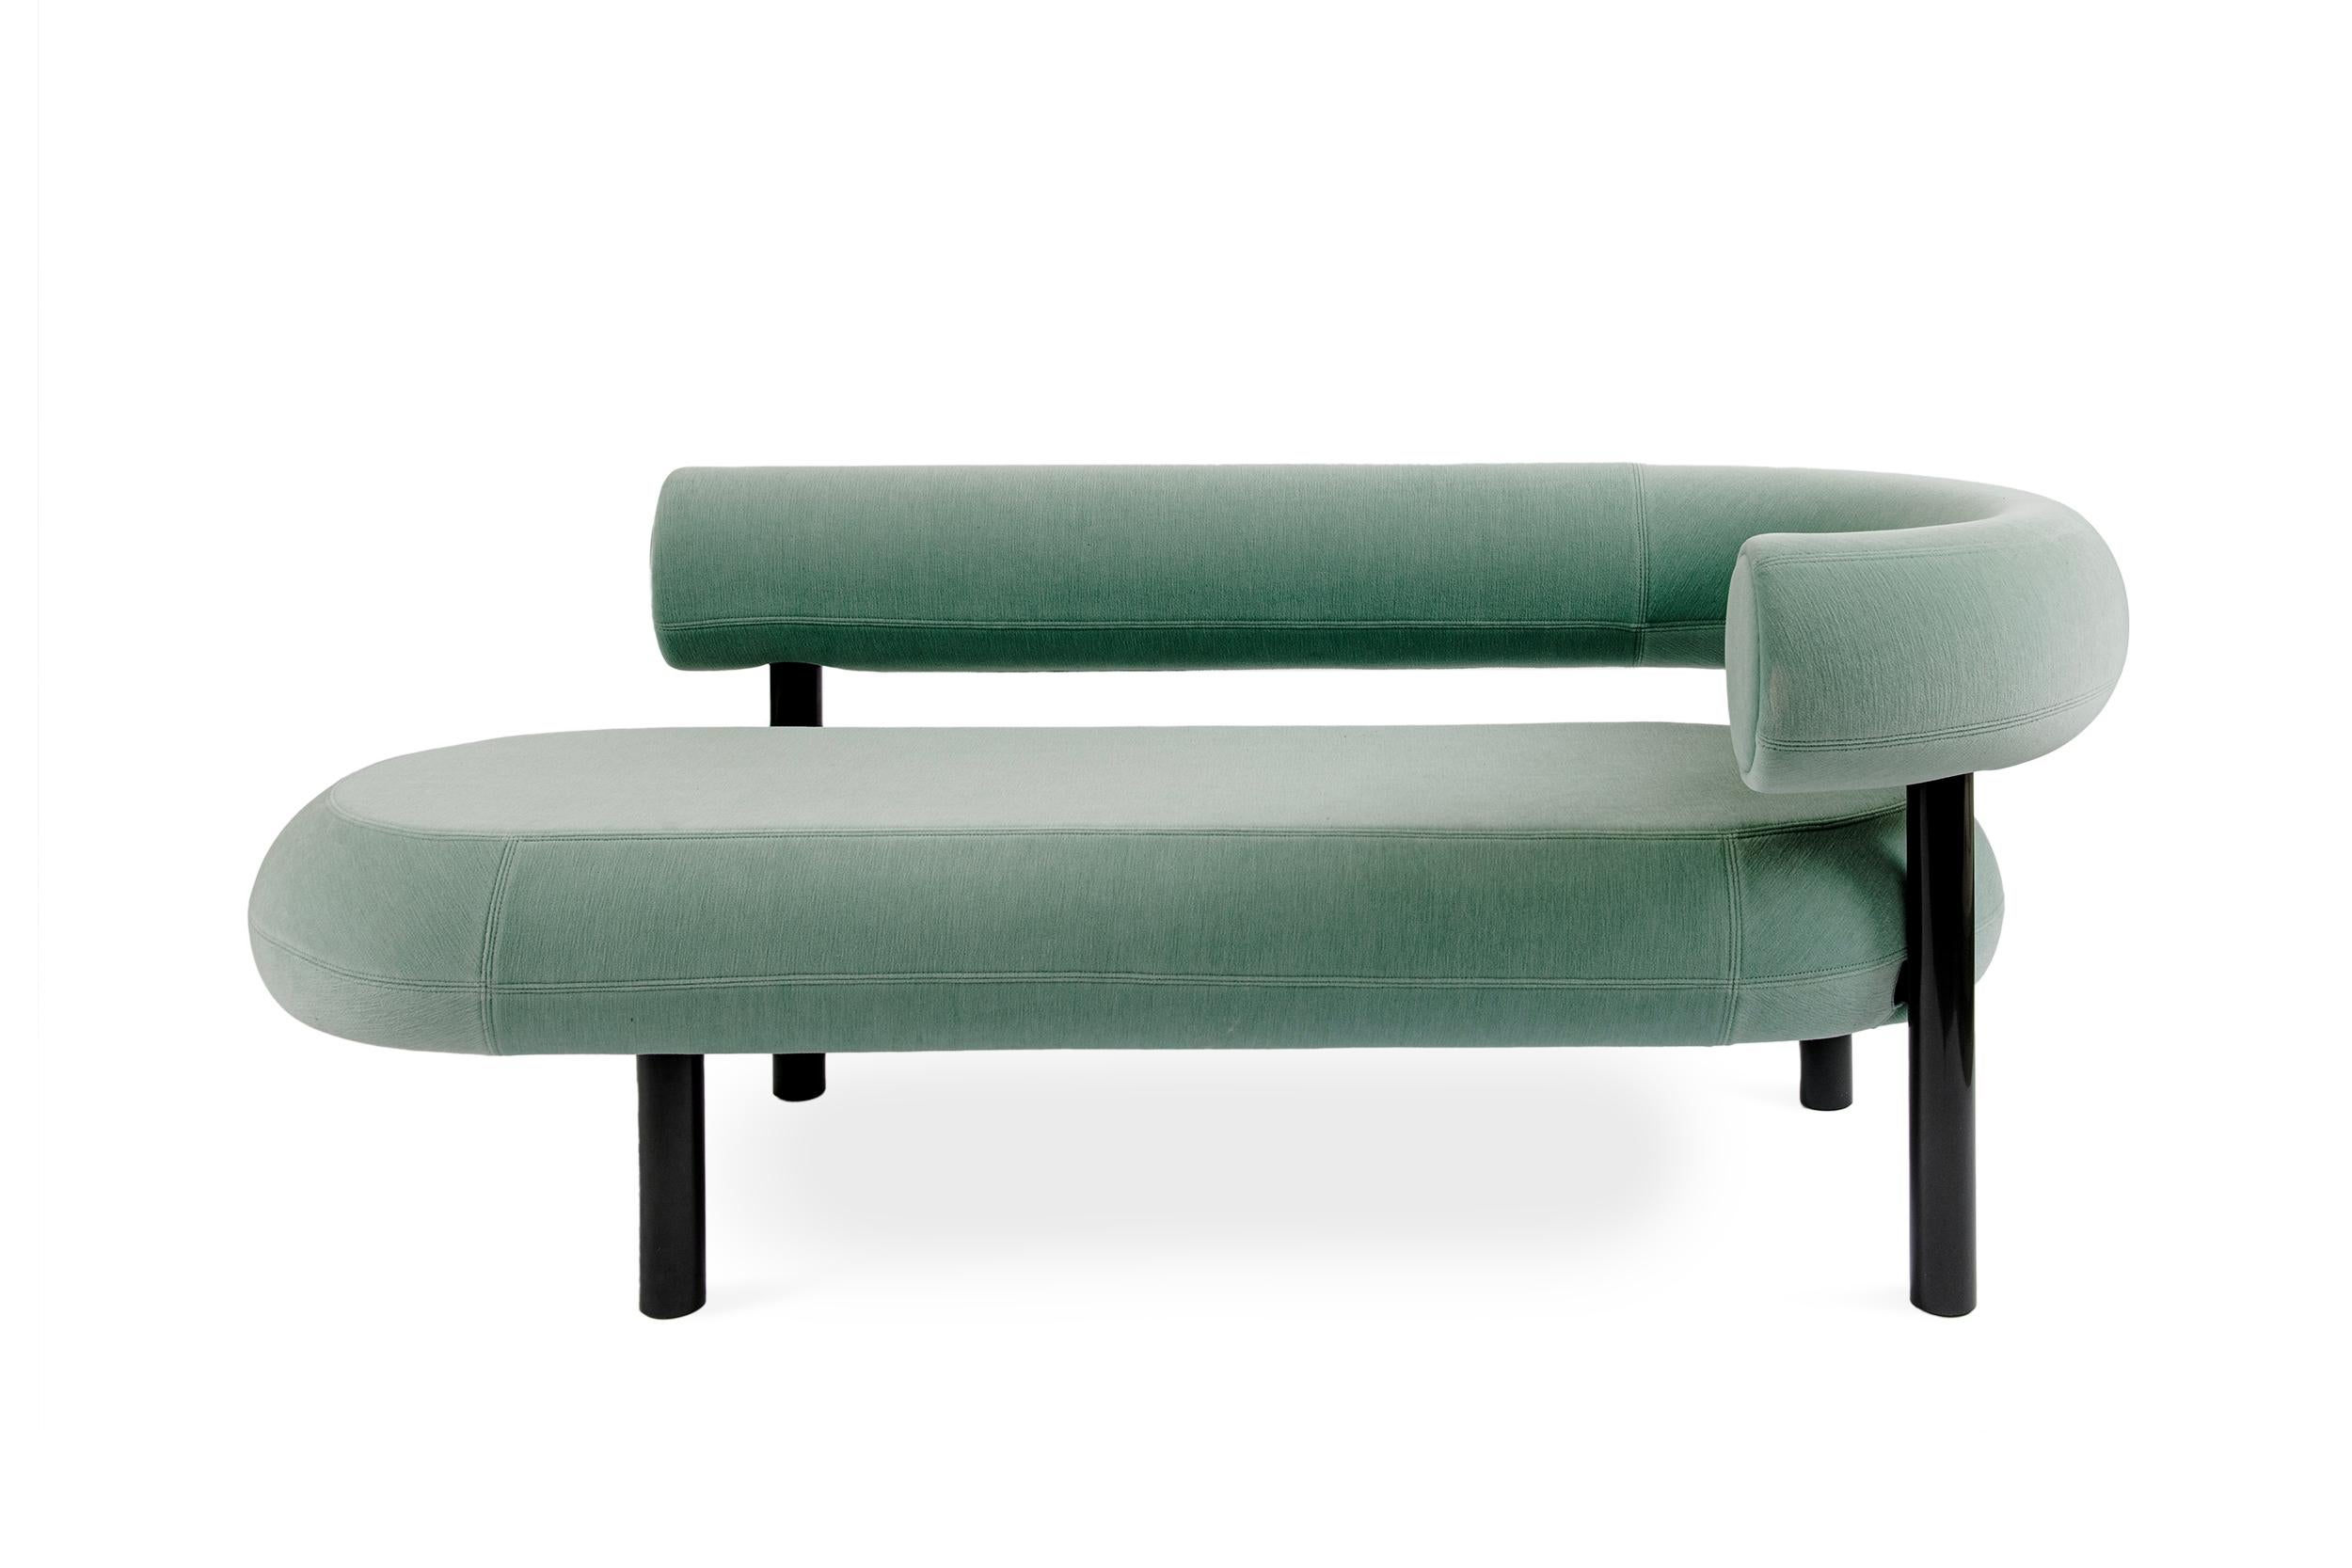 Tom Dixon Fat Chaise Lounge - 
Designed to hug the body and allowing for multiple sitting positions, this Tom Dixon Fat chaise lounge is upholstered in Kvadrat Gentle 2. 

Made from moulded foam with a metal leg launching in high gloss black lacquer